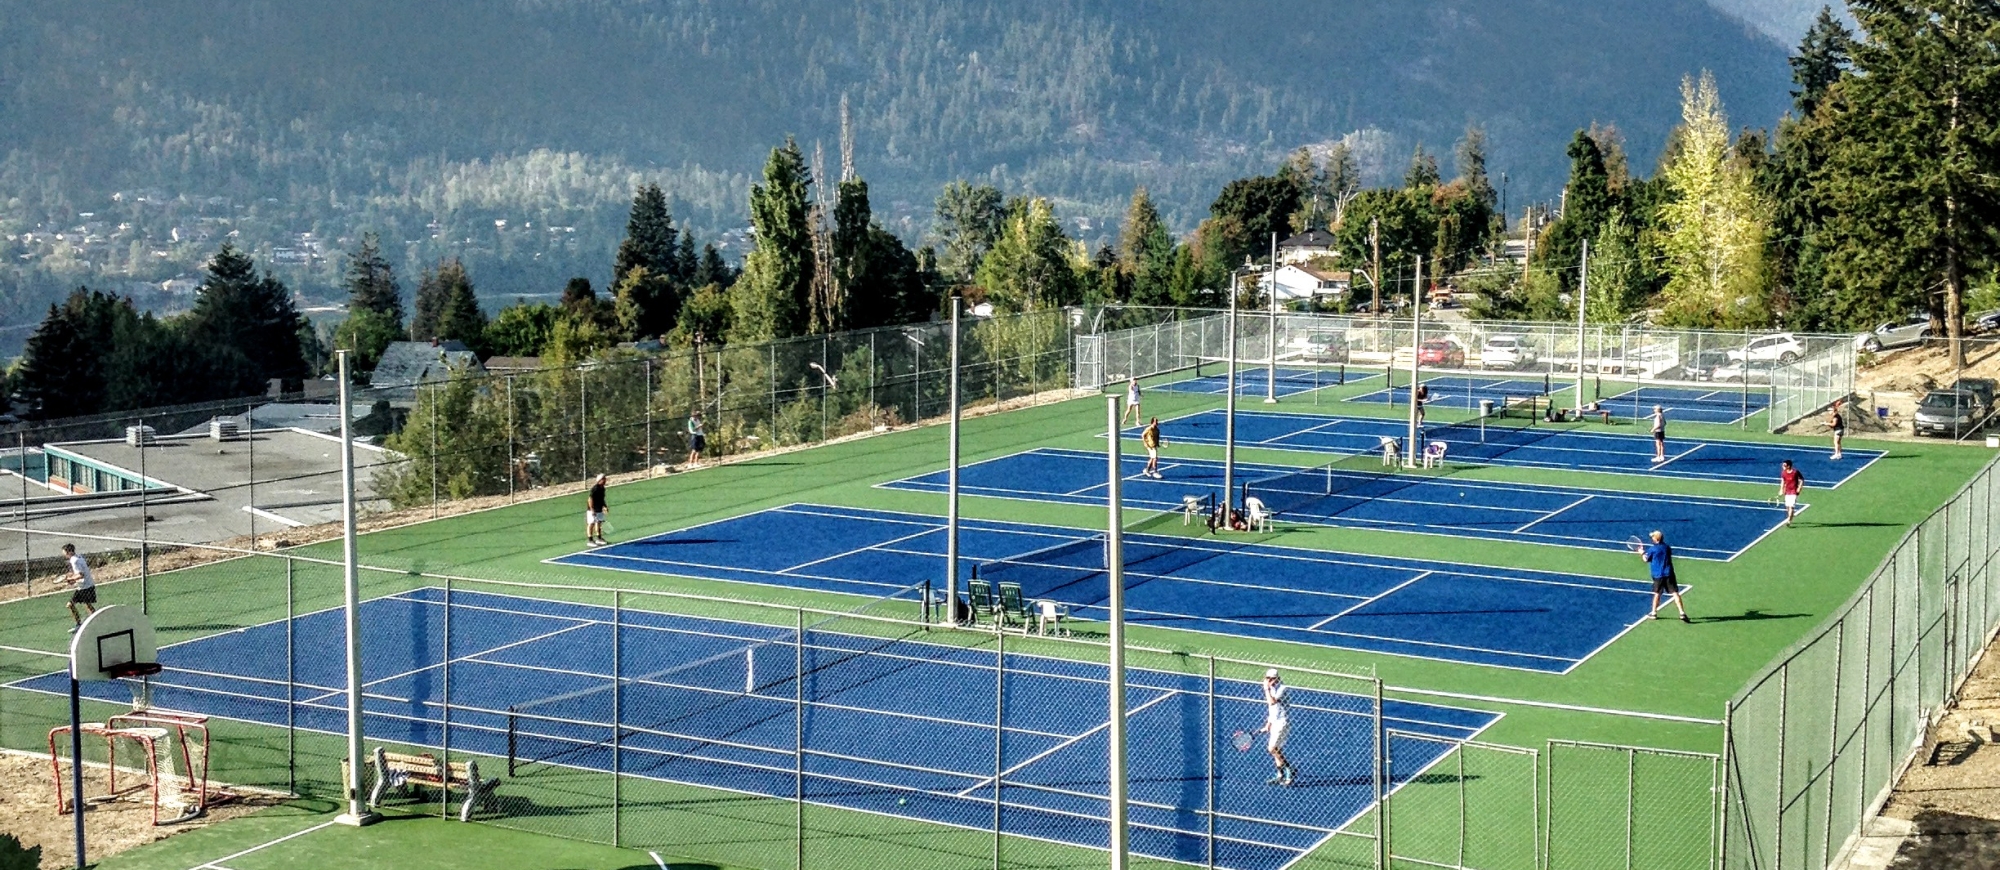 Tennis Courts in Nelson BC overlooking Kootenay Lake